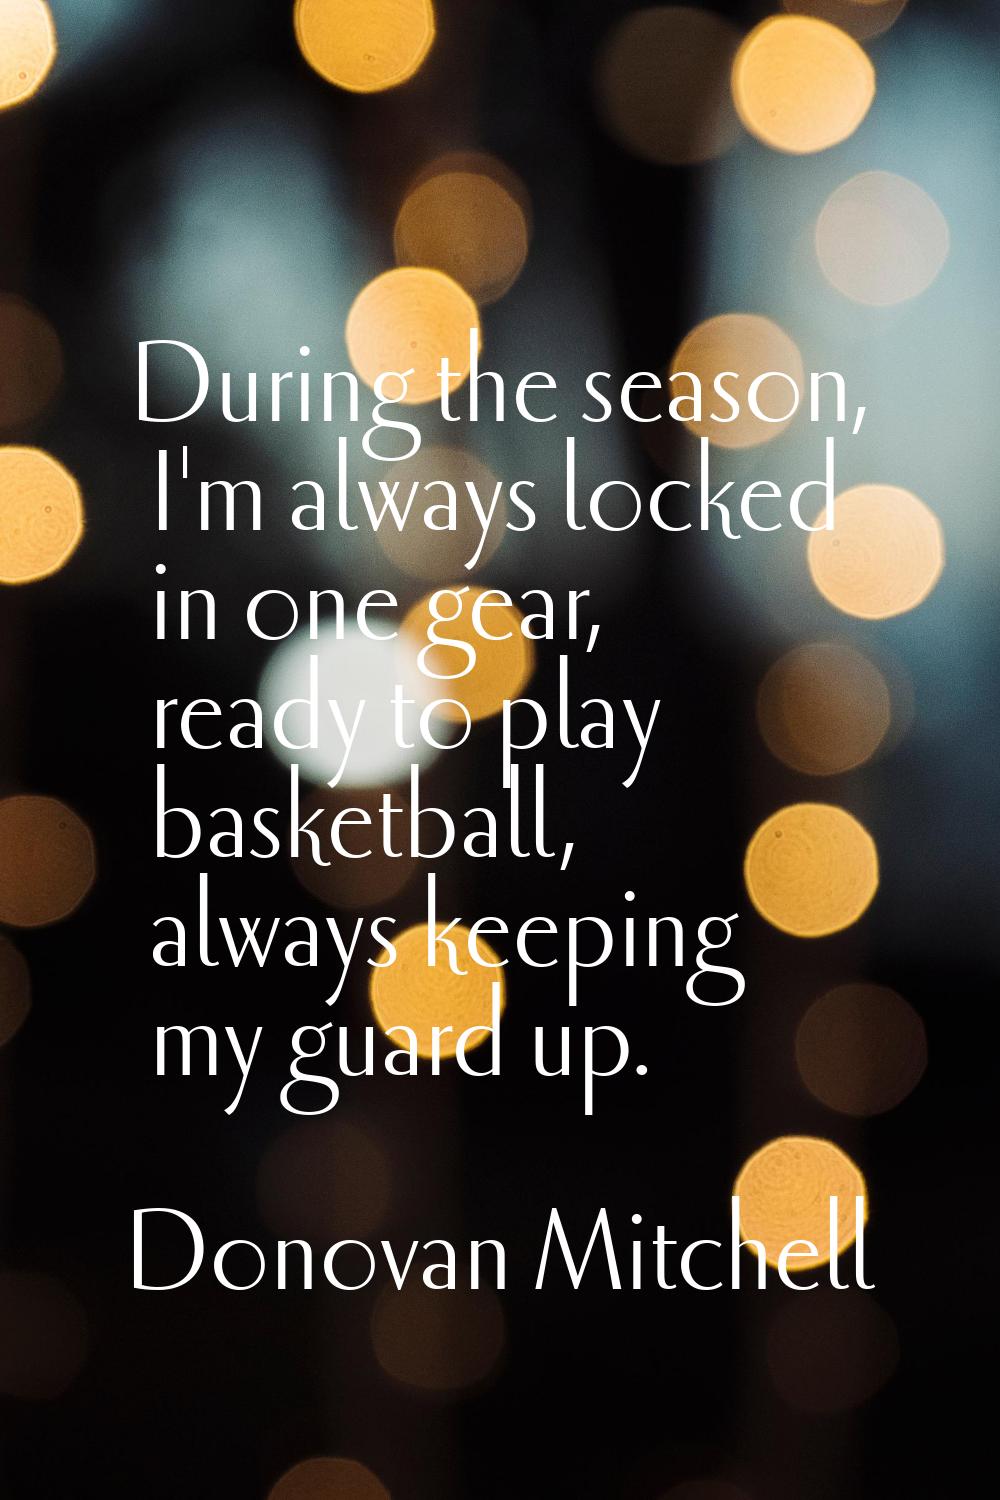 During the season, I'm always locked in one gear, ready to play basketball, always keeping my guard